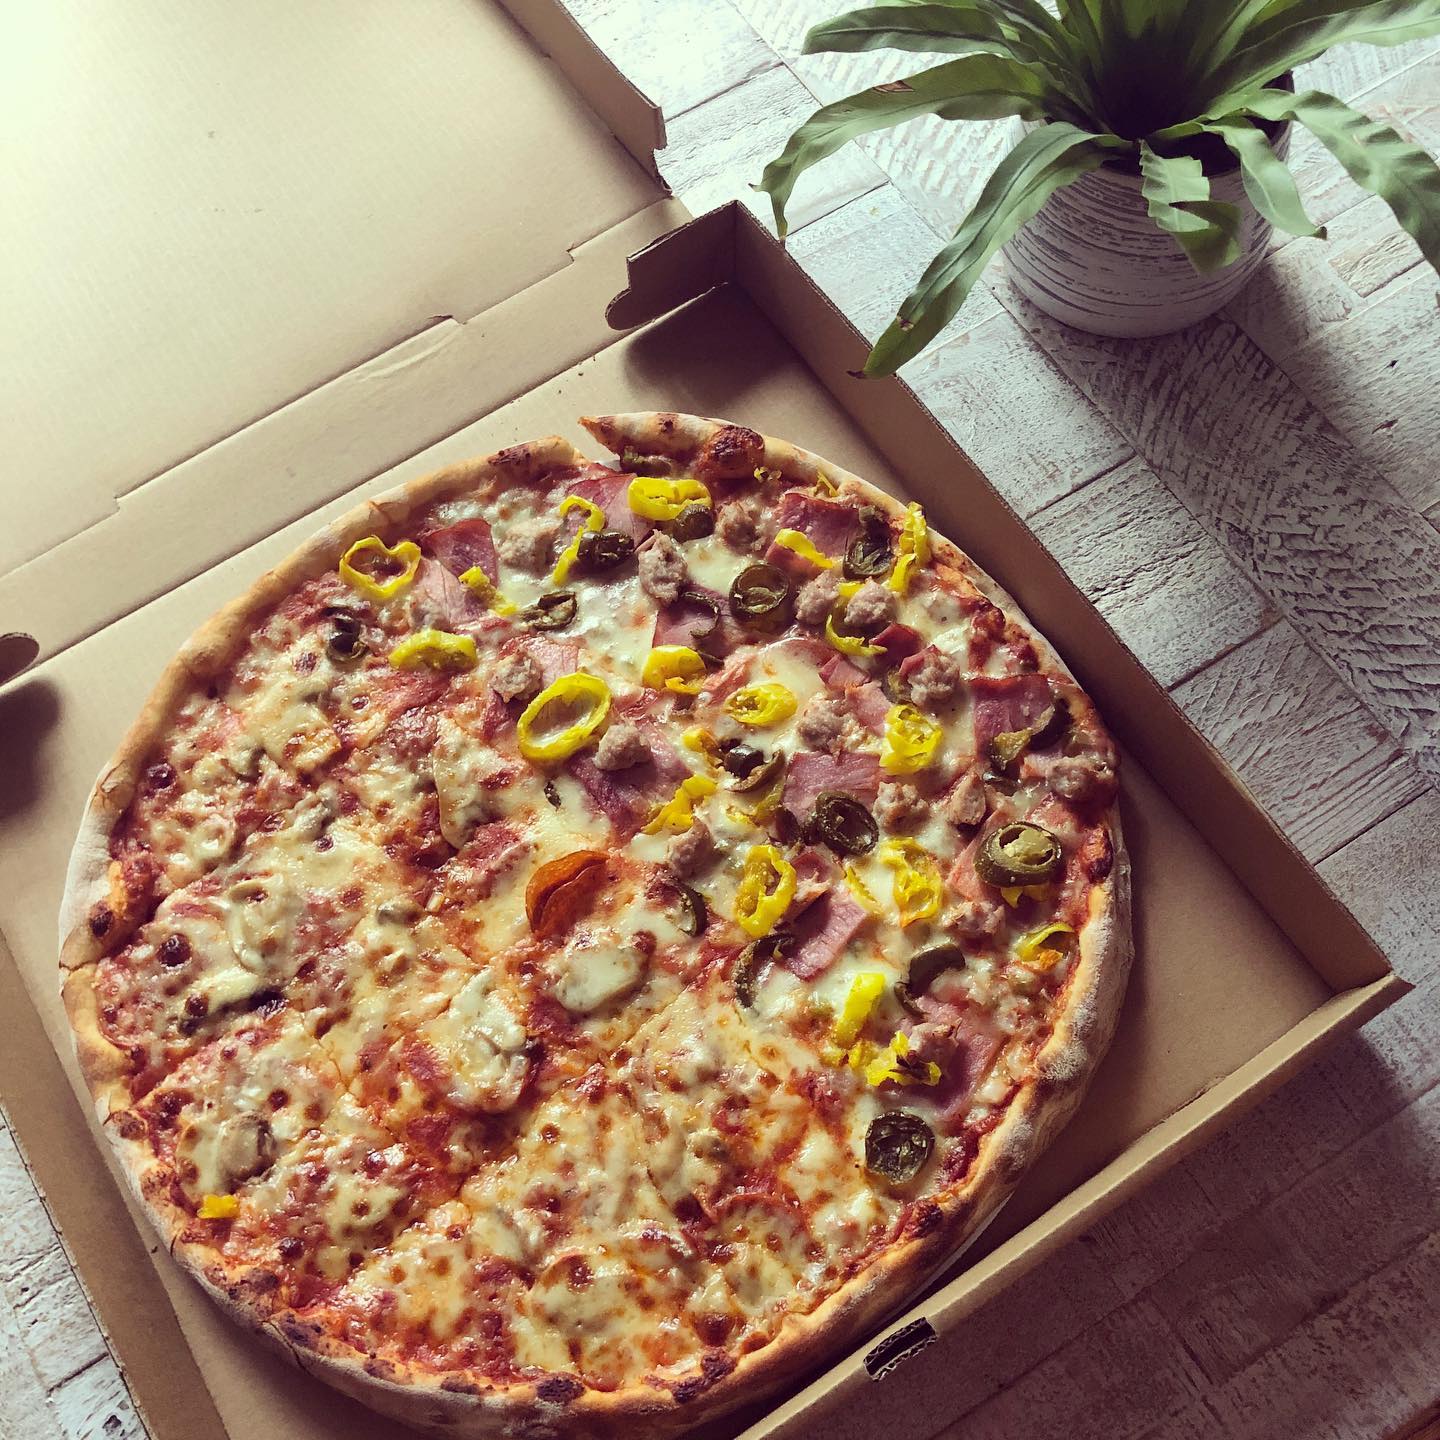 Pizza inside a box with a variety of toppings